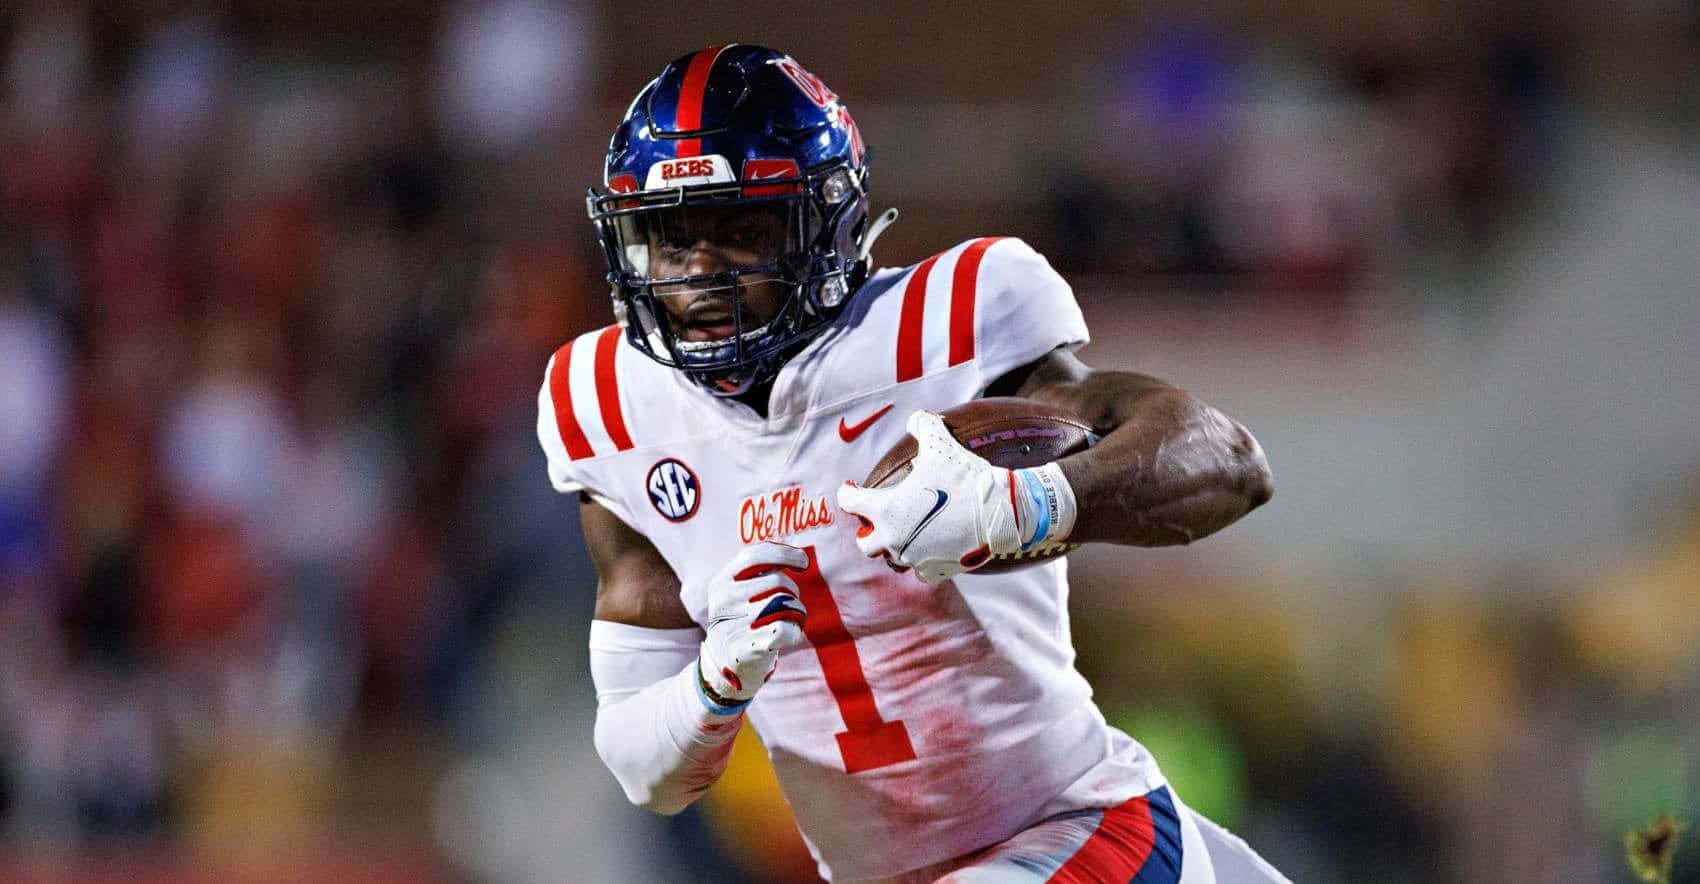 Ole Miss_ Football_ Player_ Action_ Shot Wallpaper